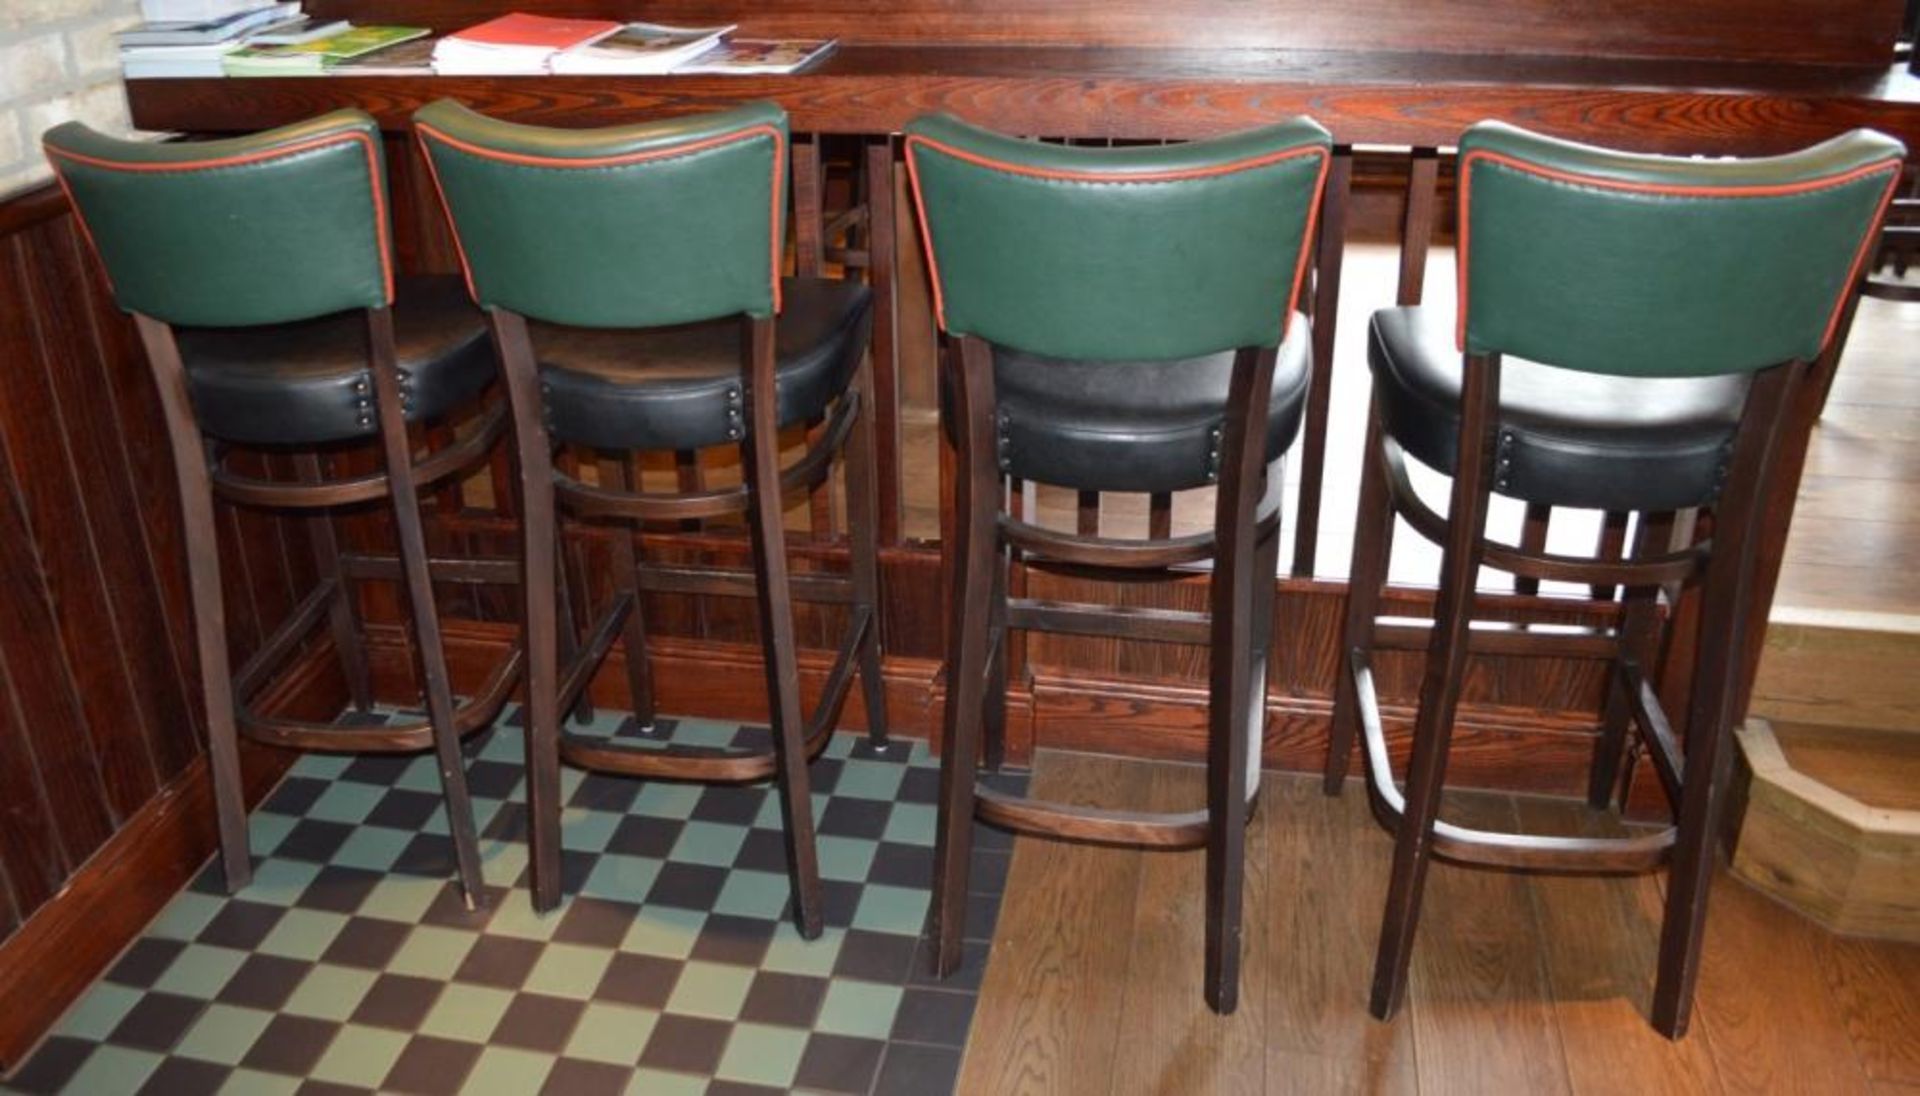 3 x Contemporary Button Back Restaurant Bar Stools - Upholstered in Green & Black Faux Leather - Image 4 of 4